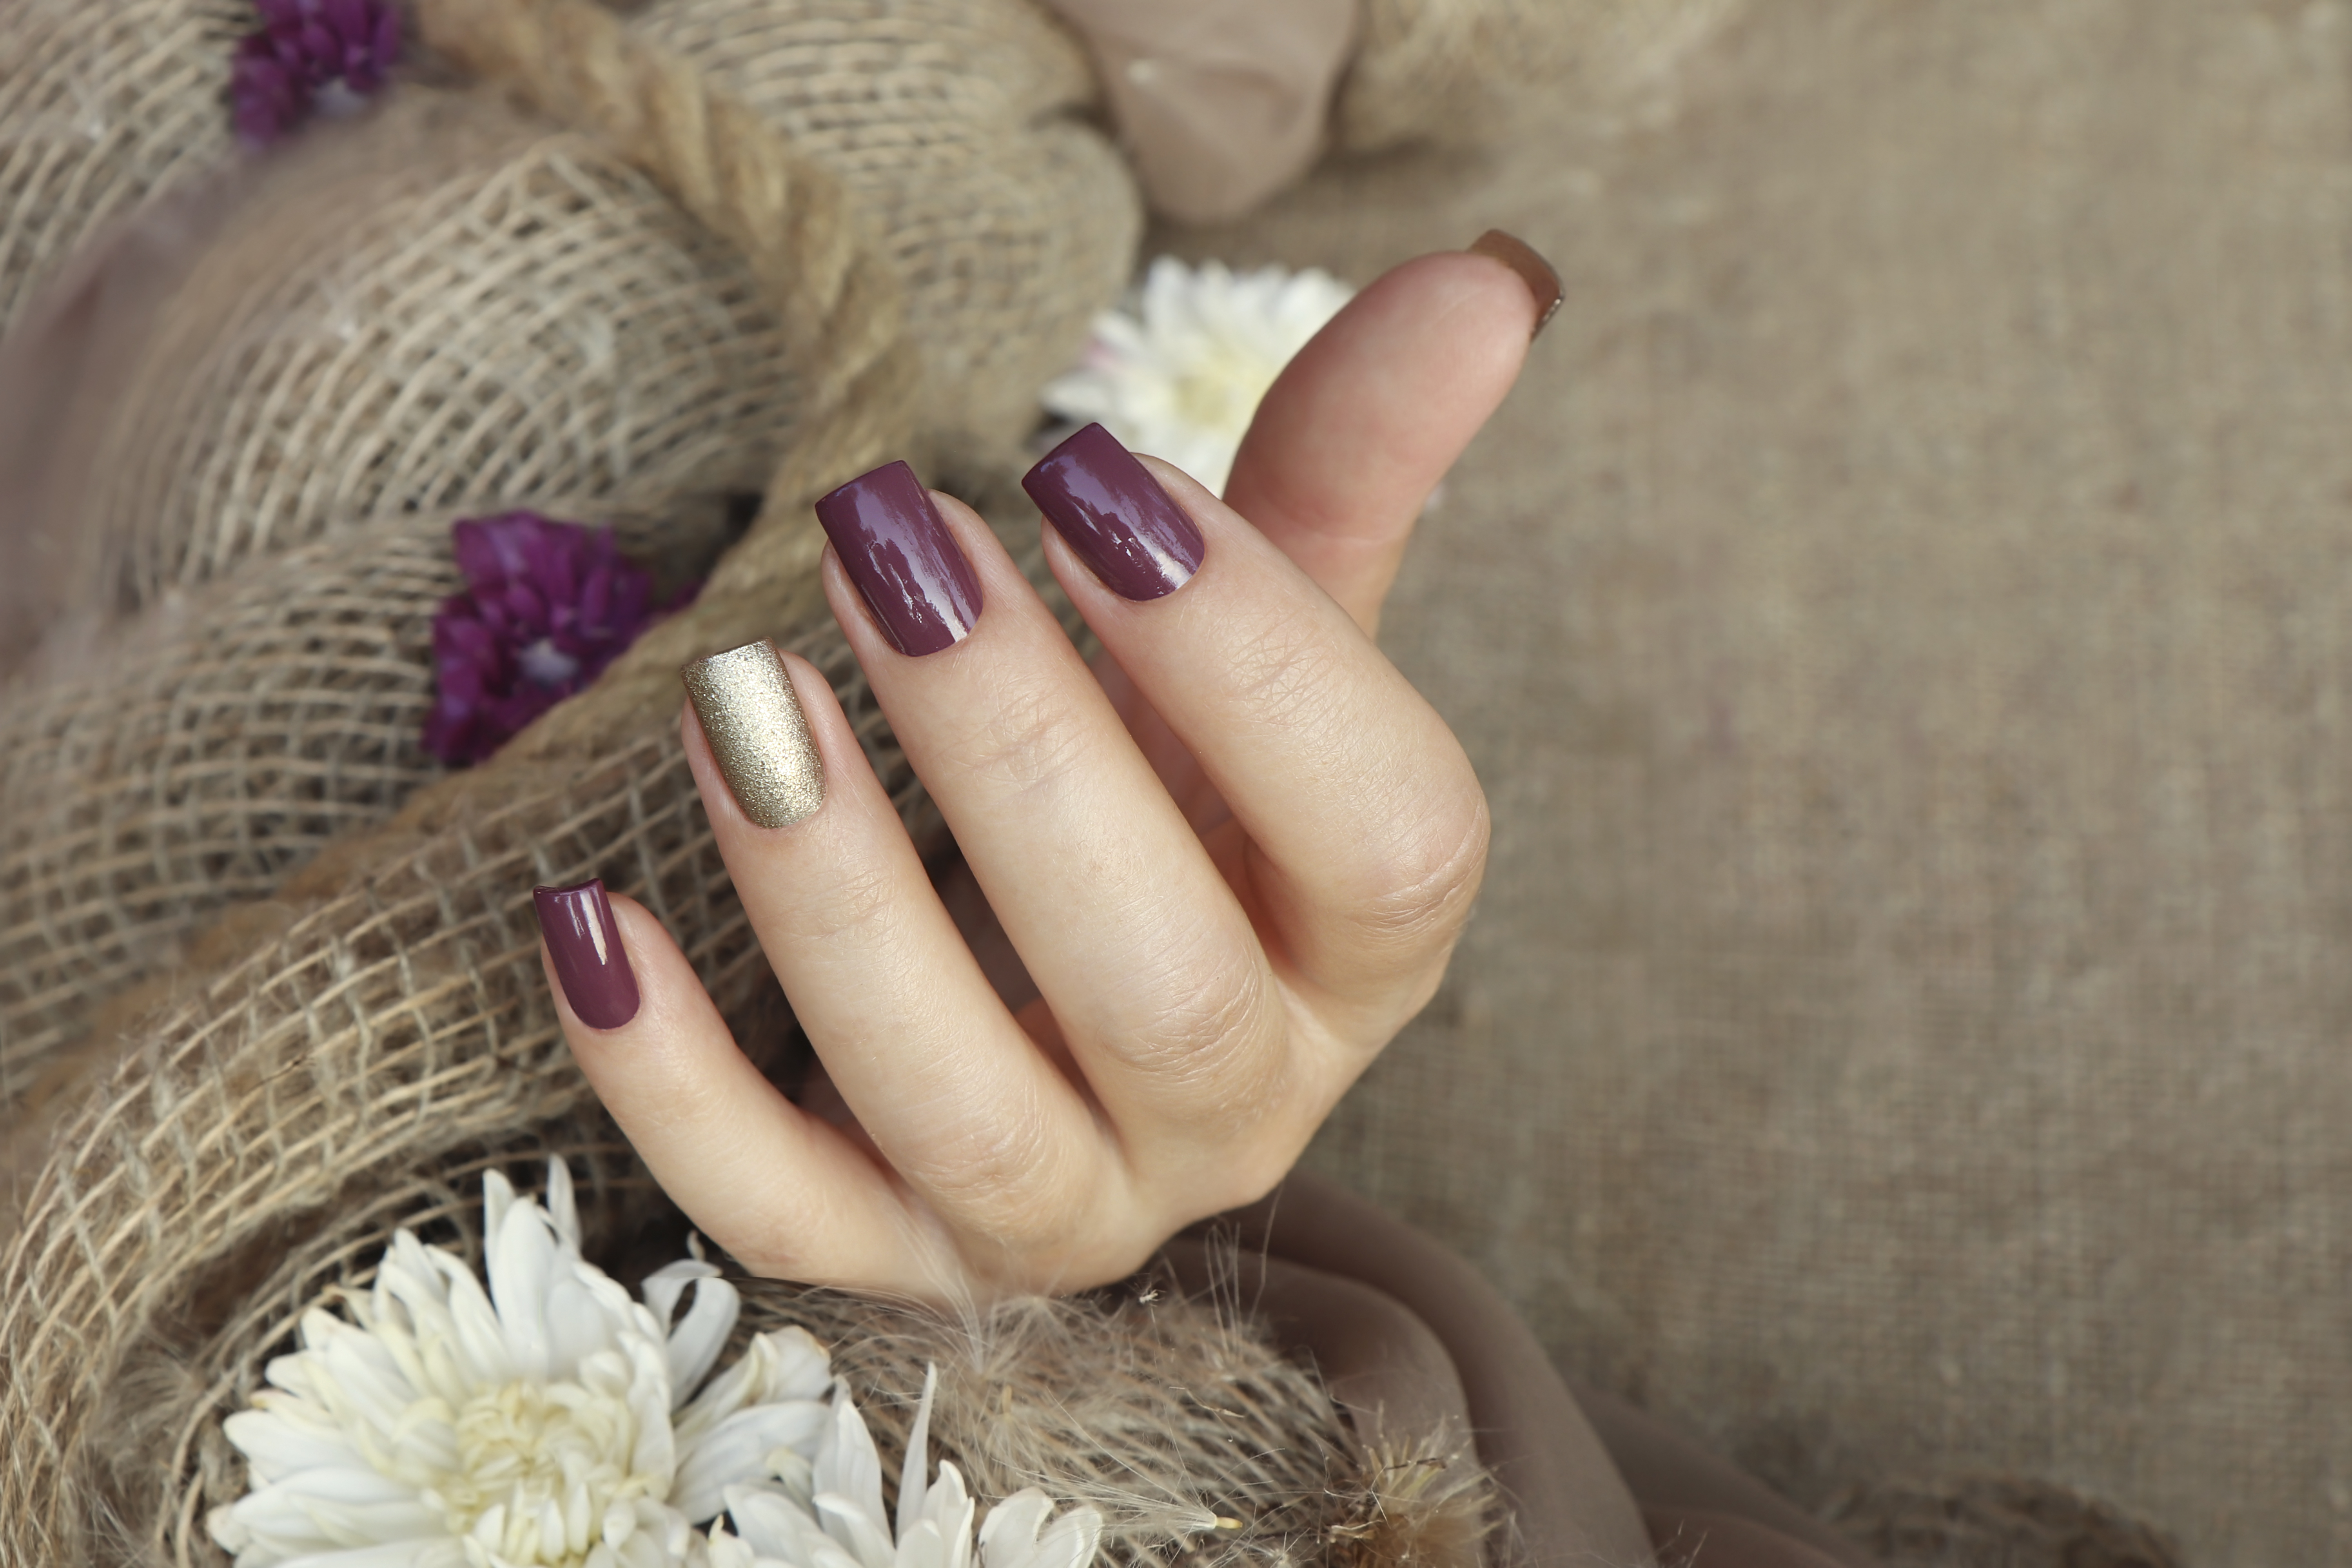 A female hand adorned with plum and golden nail hues | Source: Getty Images